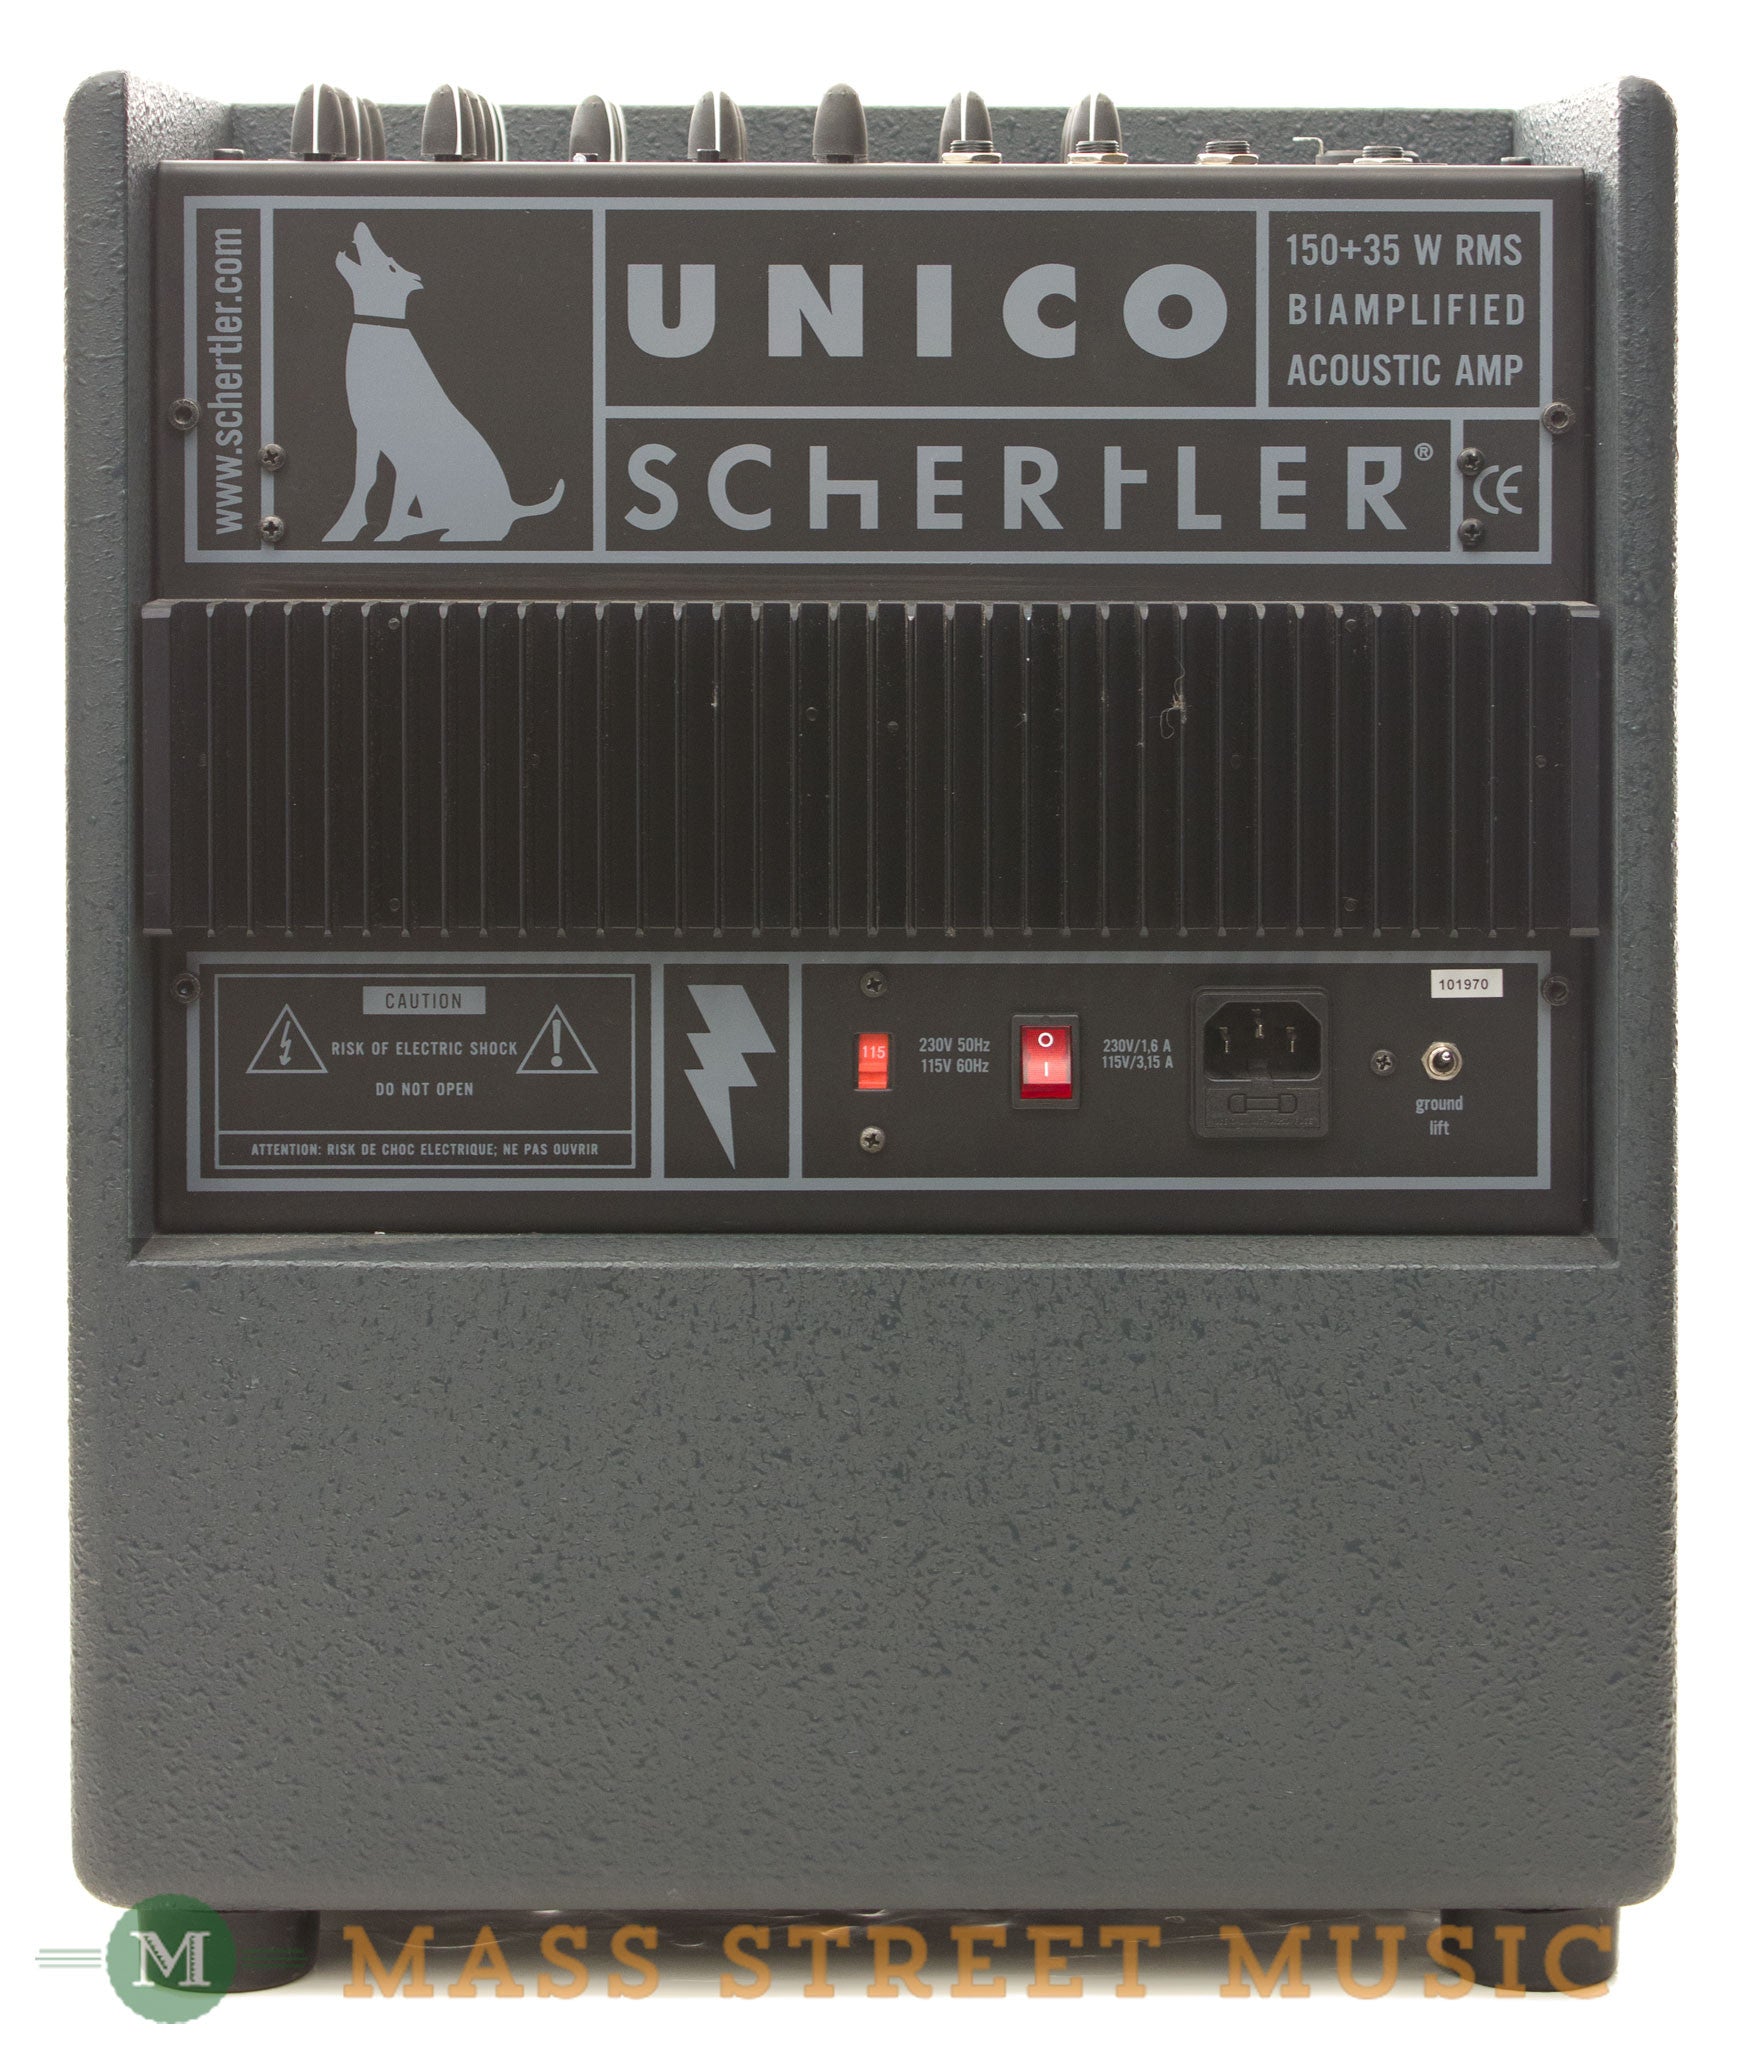 Schertler - Unico Used Acoustic Amp with Case | Mass Street Music